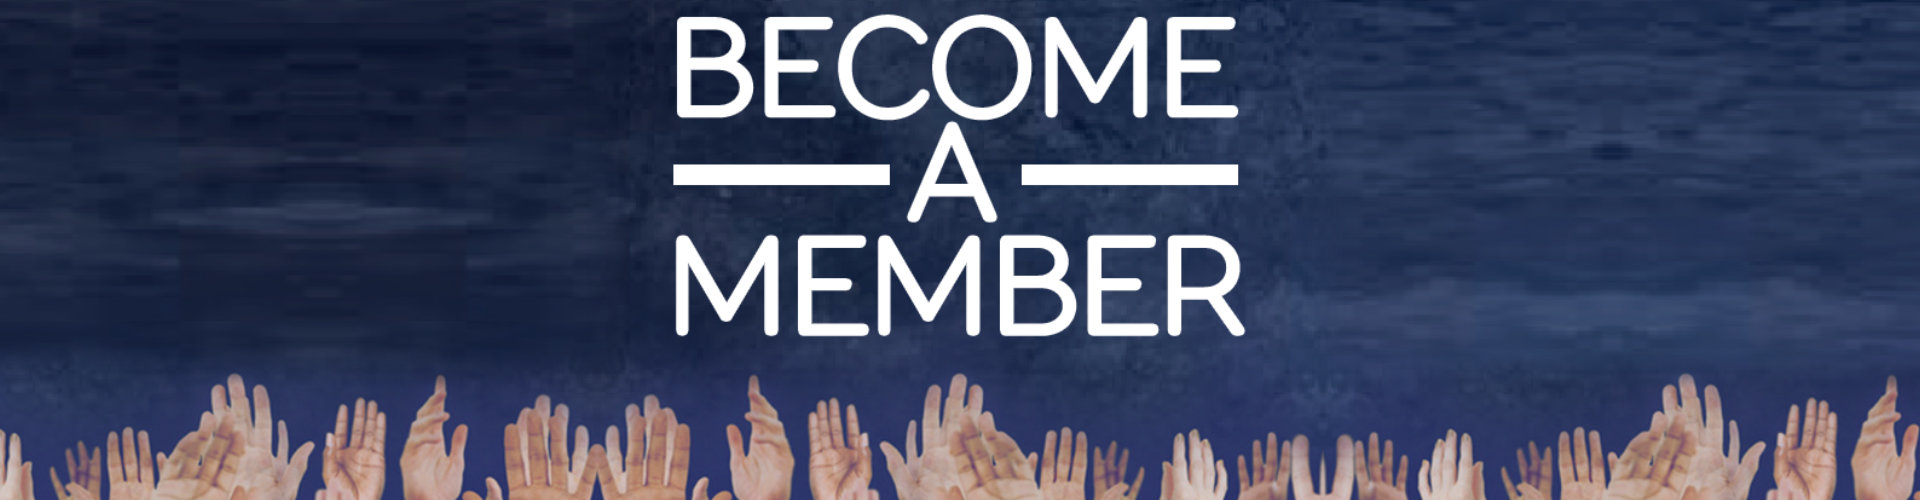 become a member image